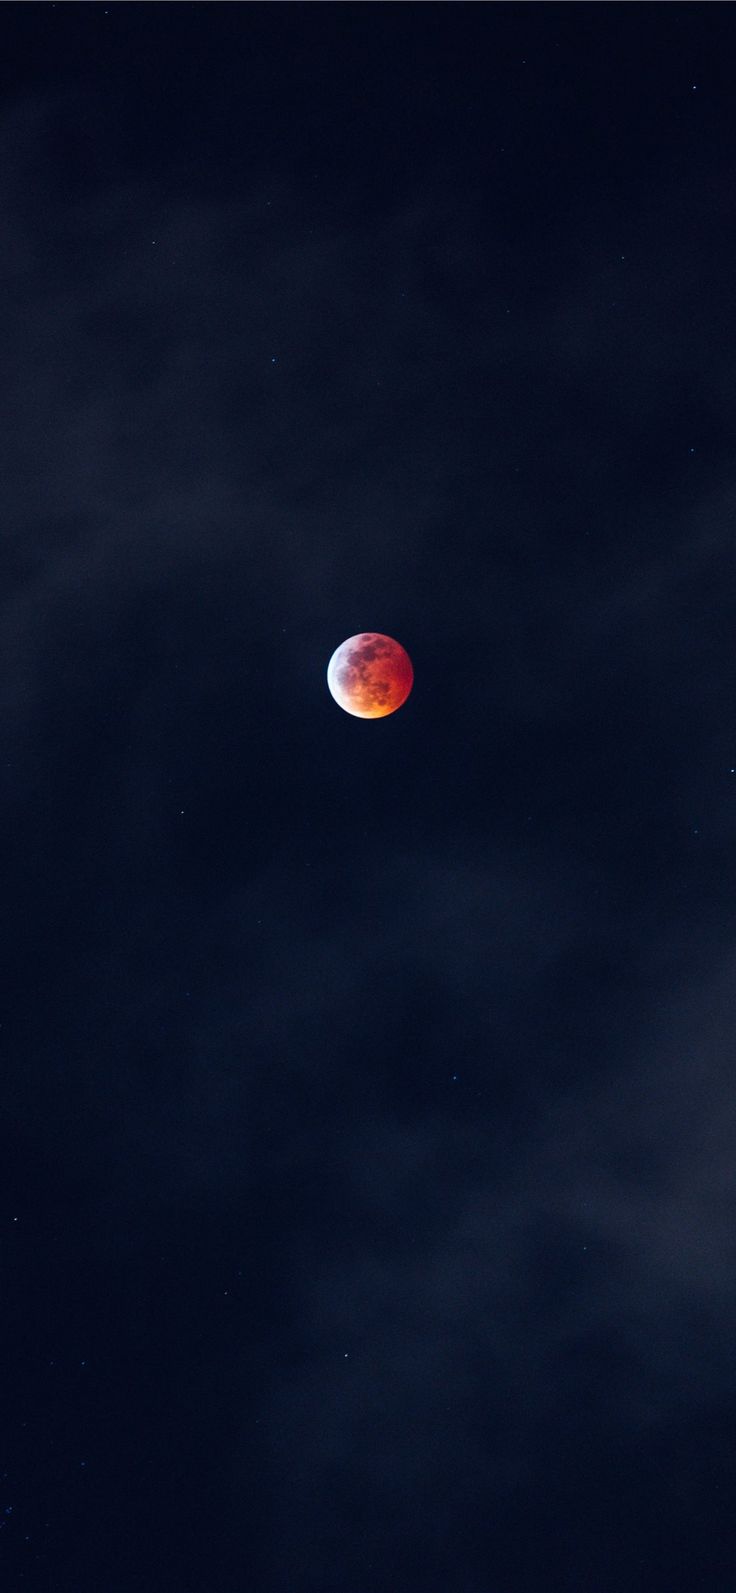 IPhone wallpaper of a red moon in the night sky. - Eclipse